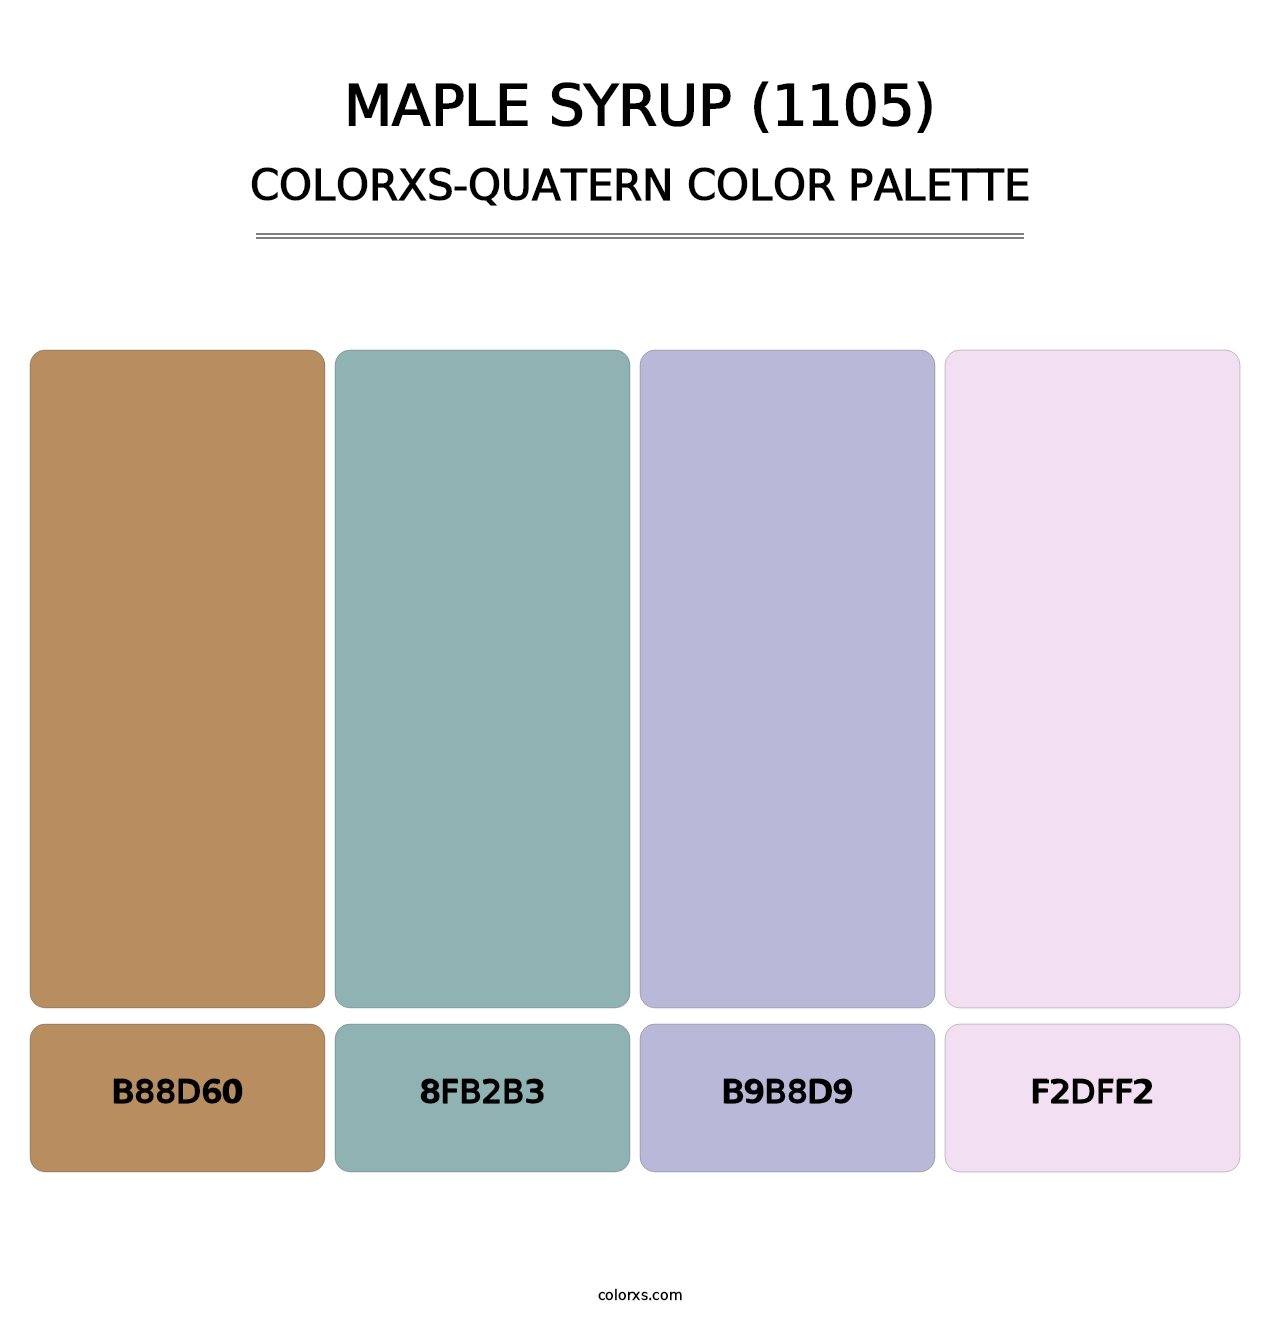 Maple Syrup (1105) - Colorxs Quatern Palette